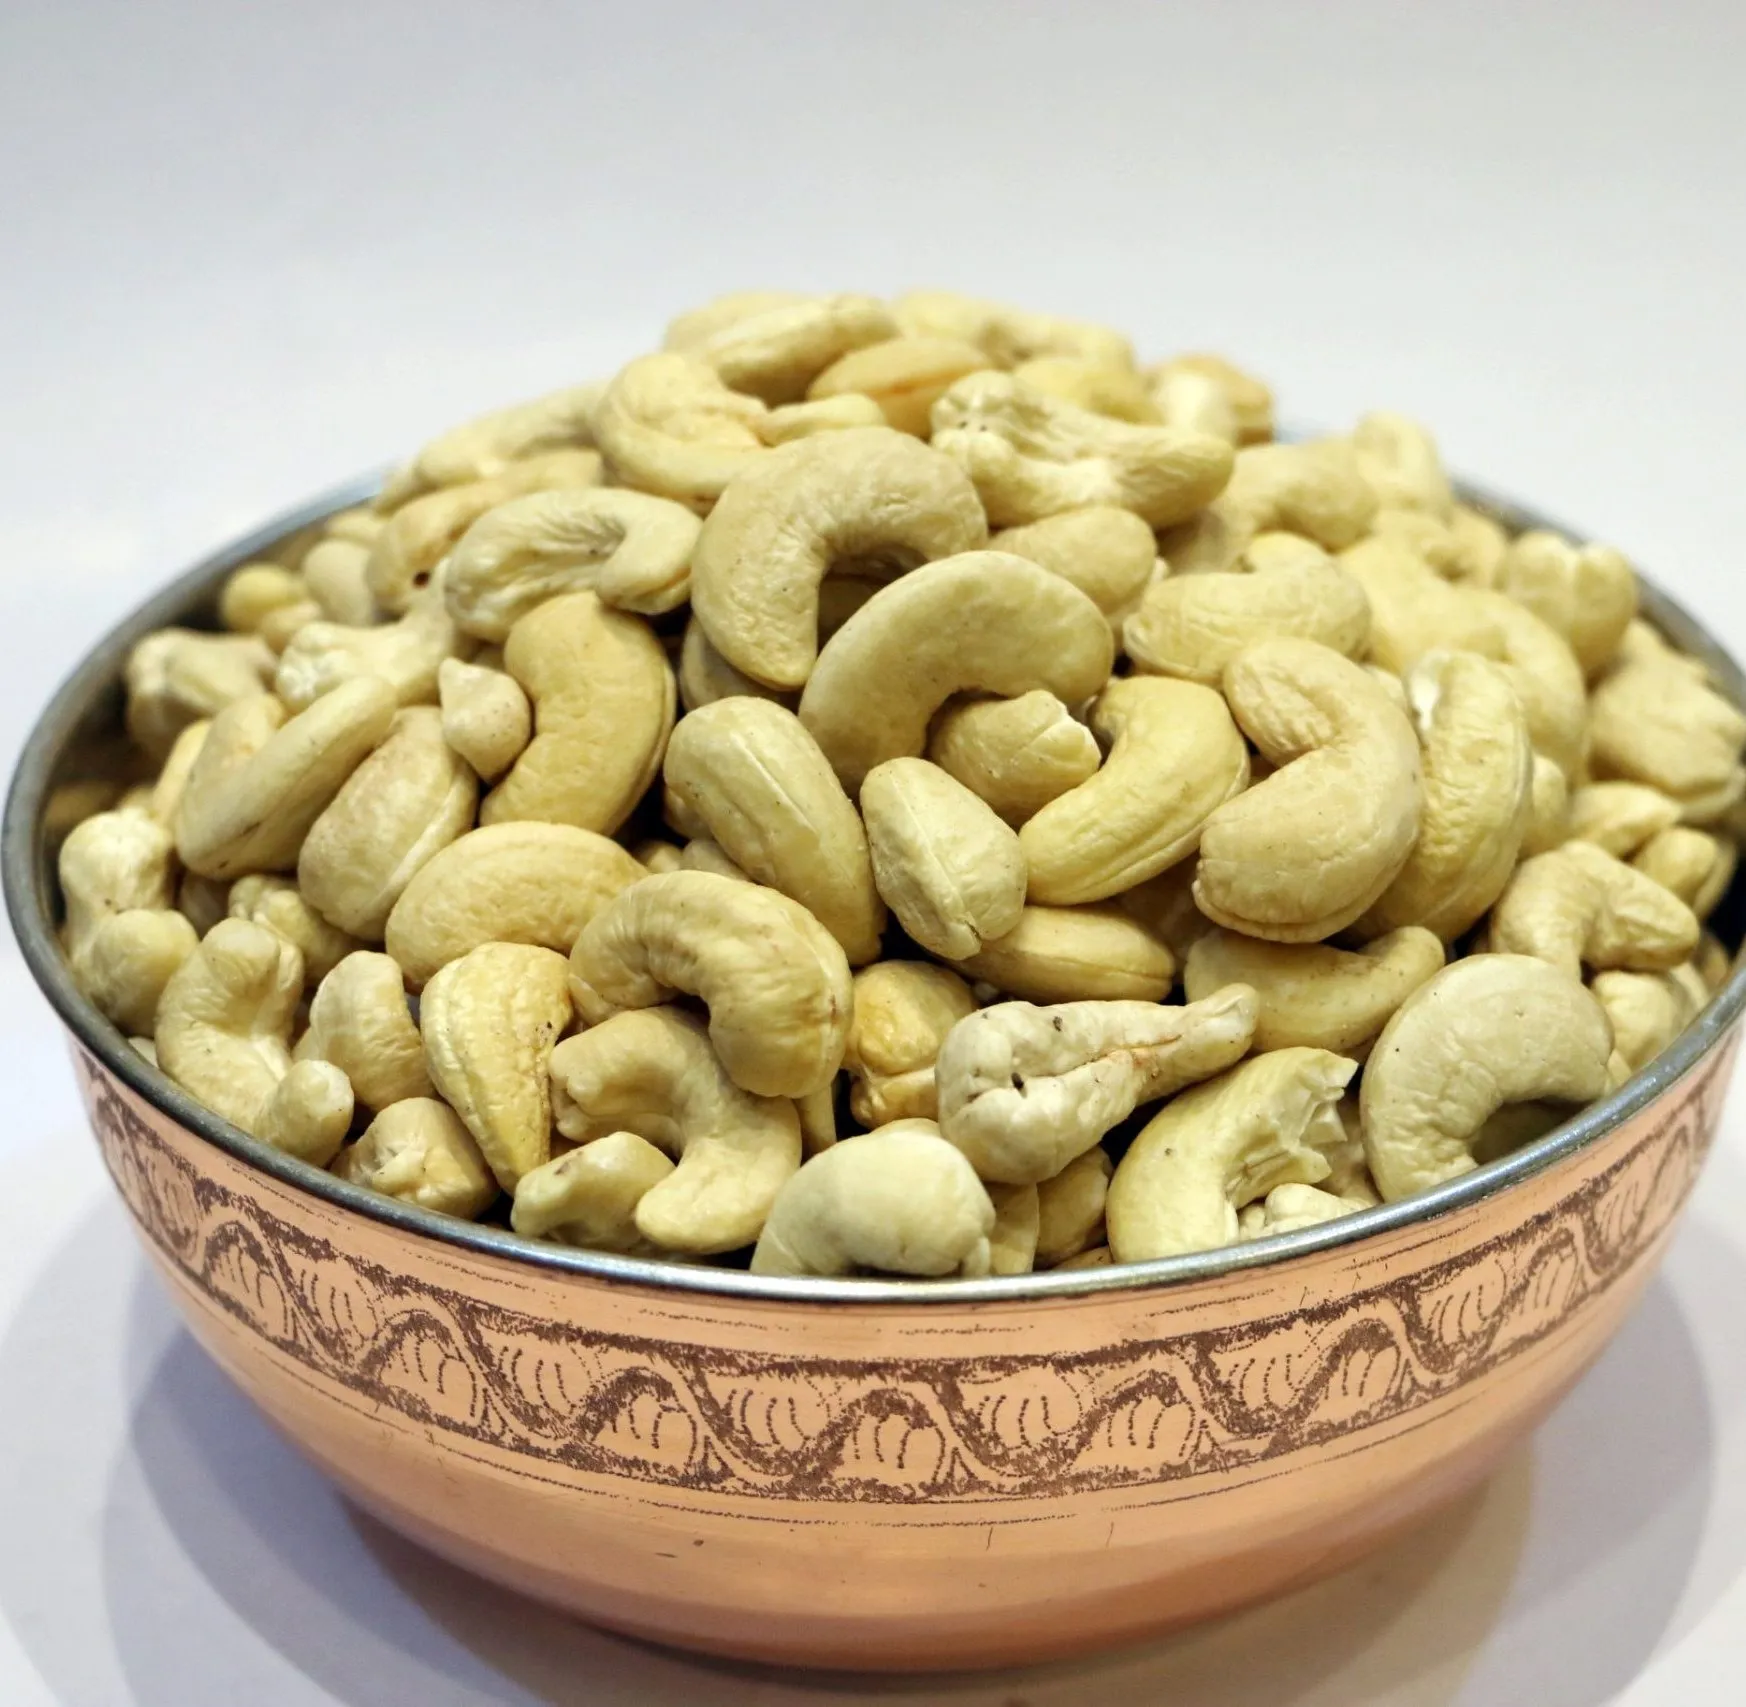 The purchase price of roasted cashew nut in Bangladesh 